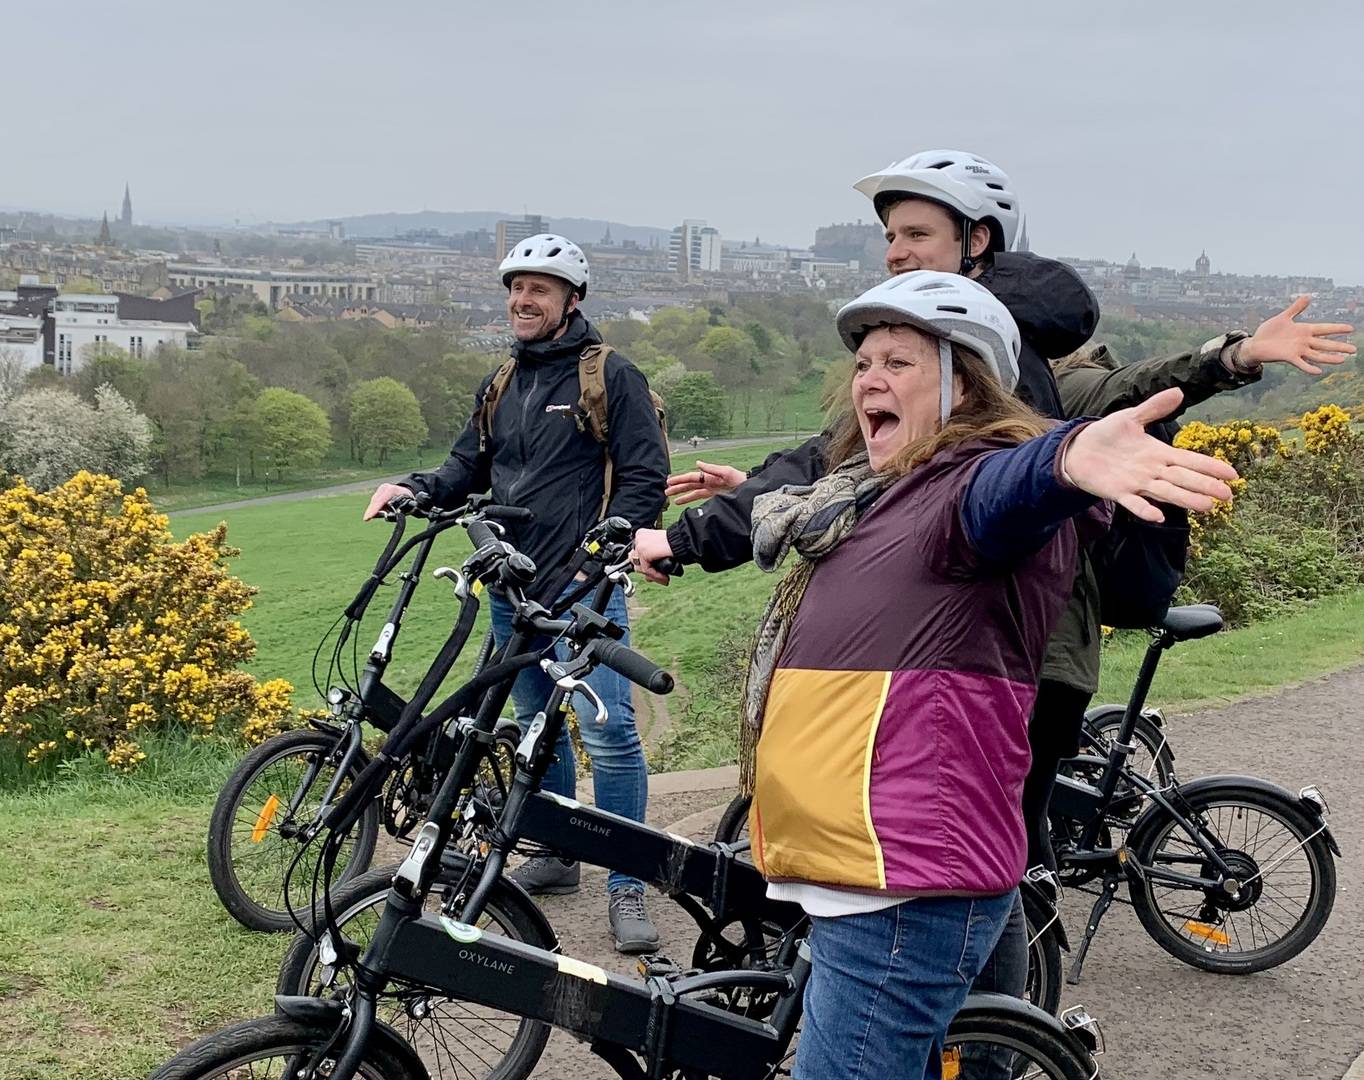 A wee pedal's cycle tour - always fun with great views over Edinburgh,© A wee pedal